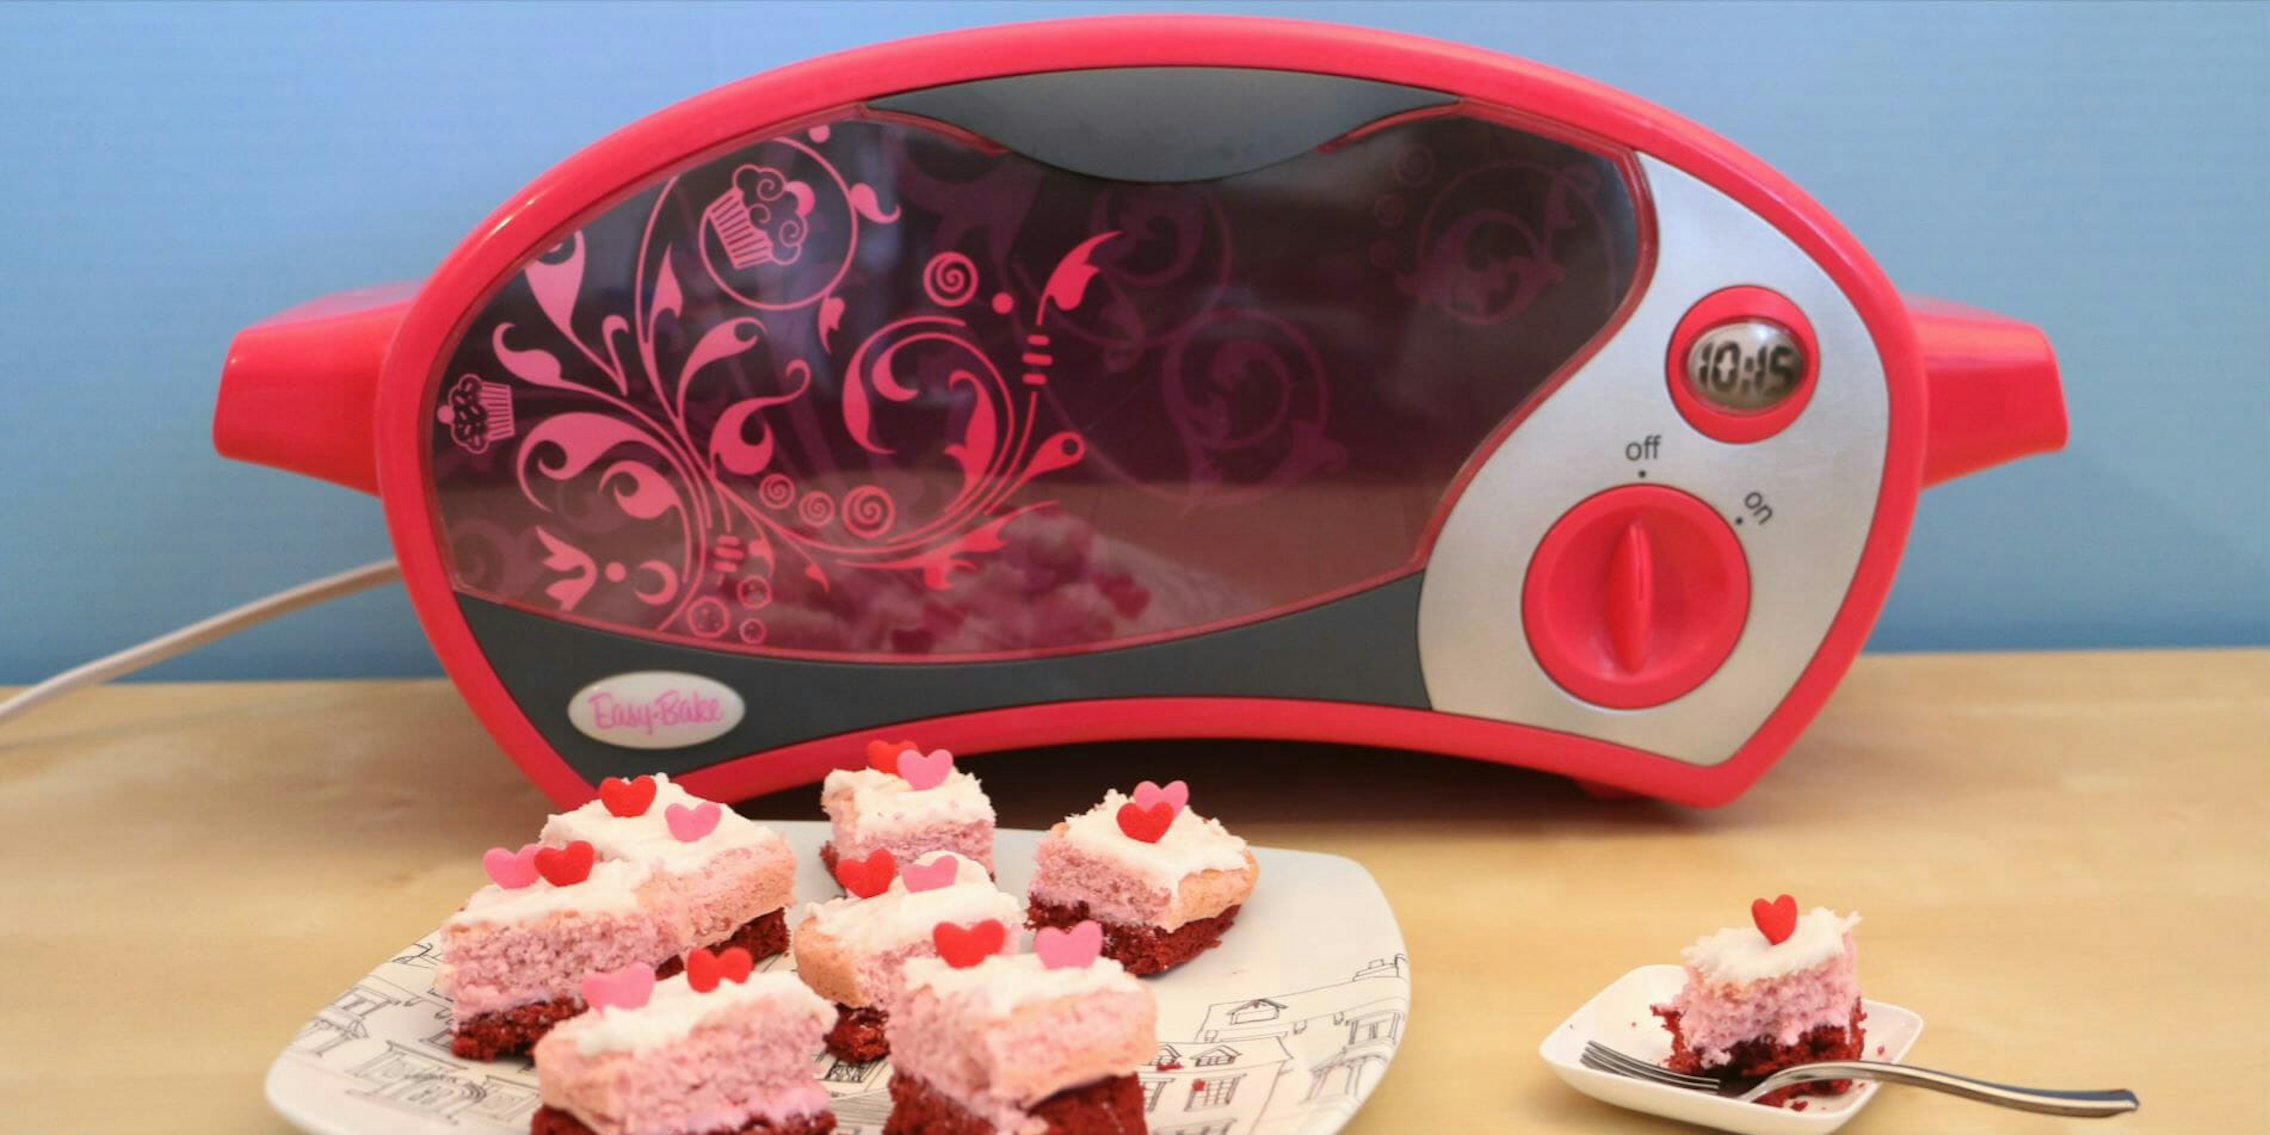 A bizarre toy oven that appears to turn dough into freshly baked